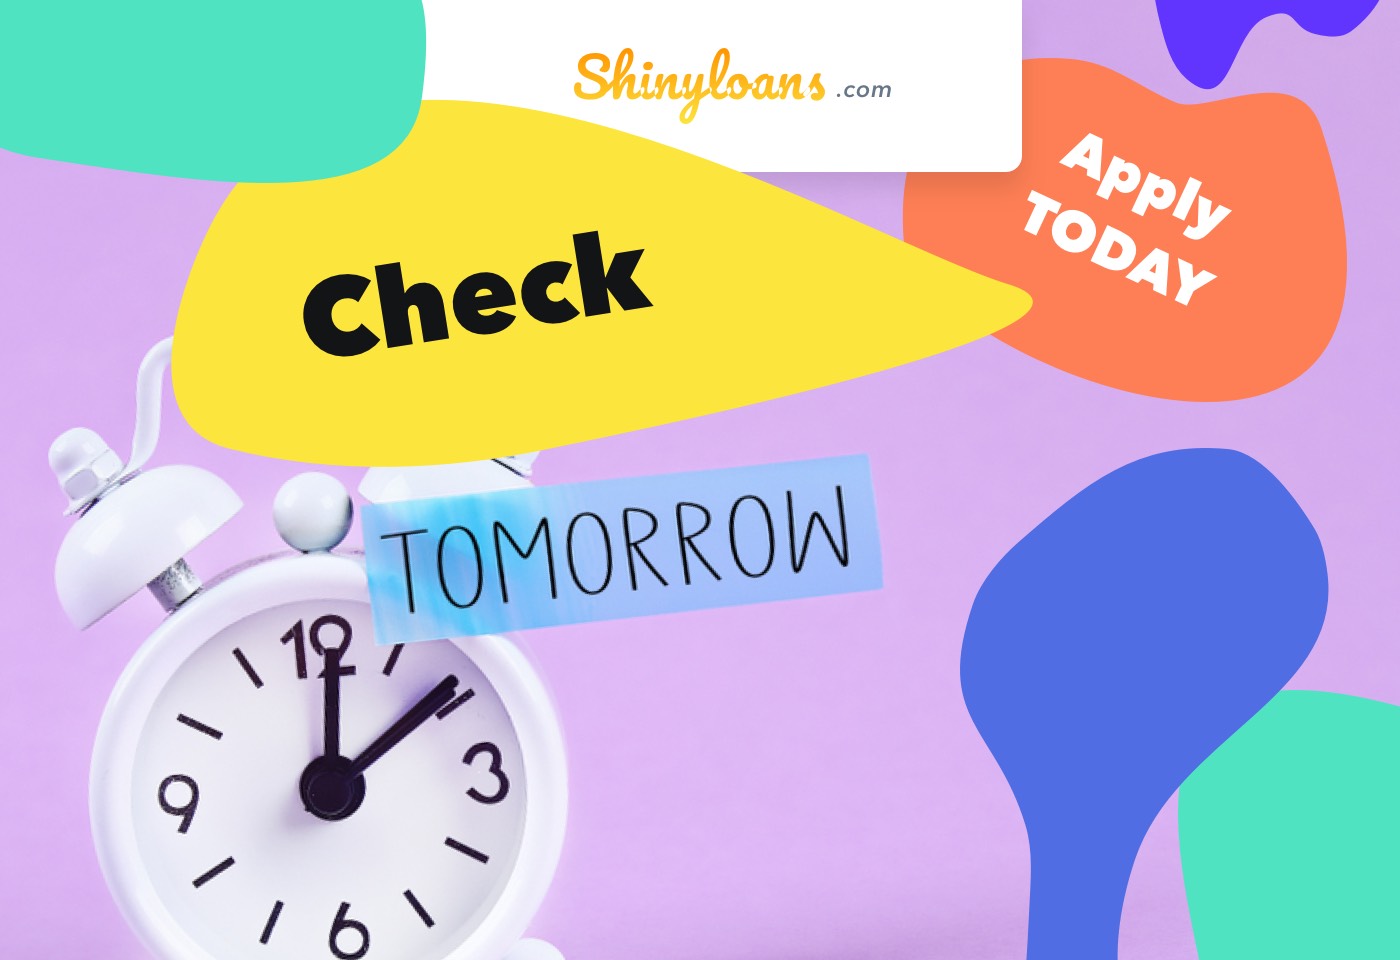 Submit Your Loan Request Today-Check Your Account Tomorrow